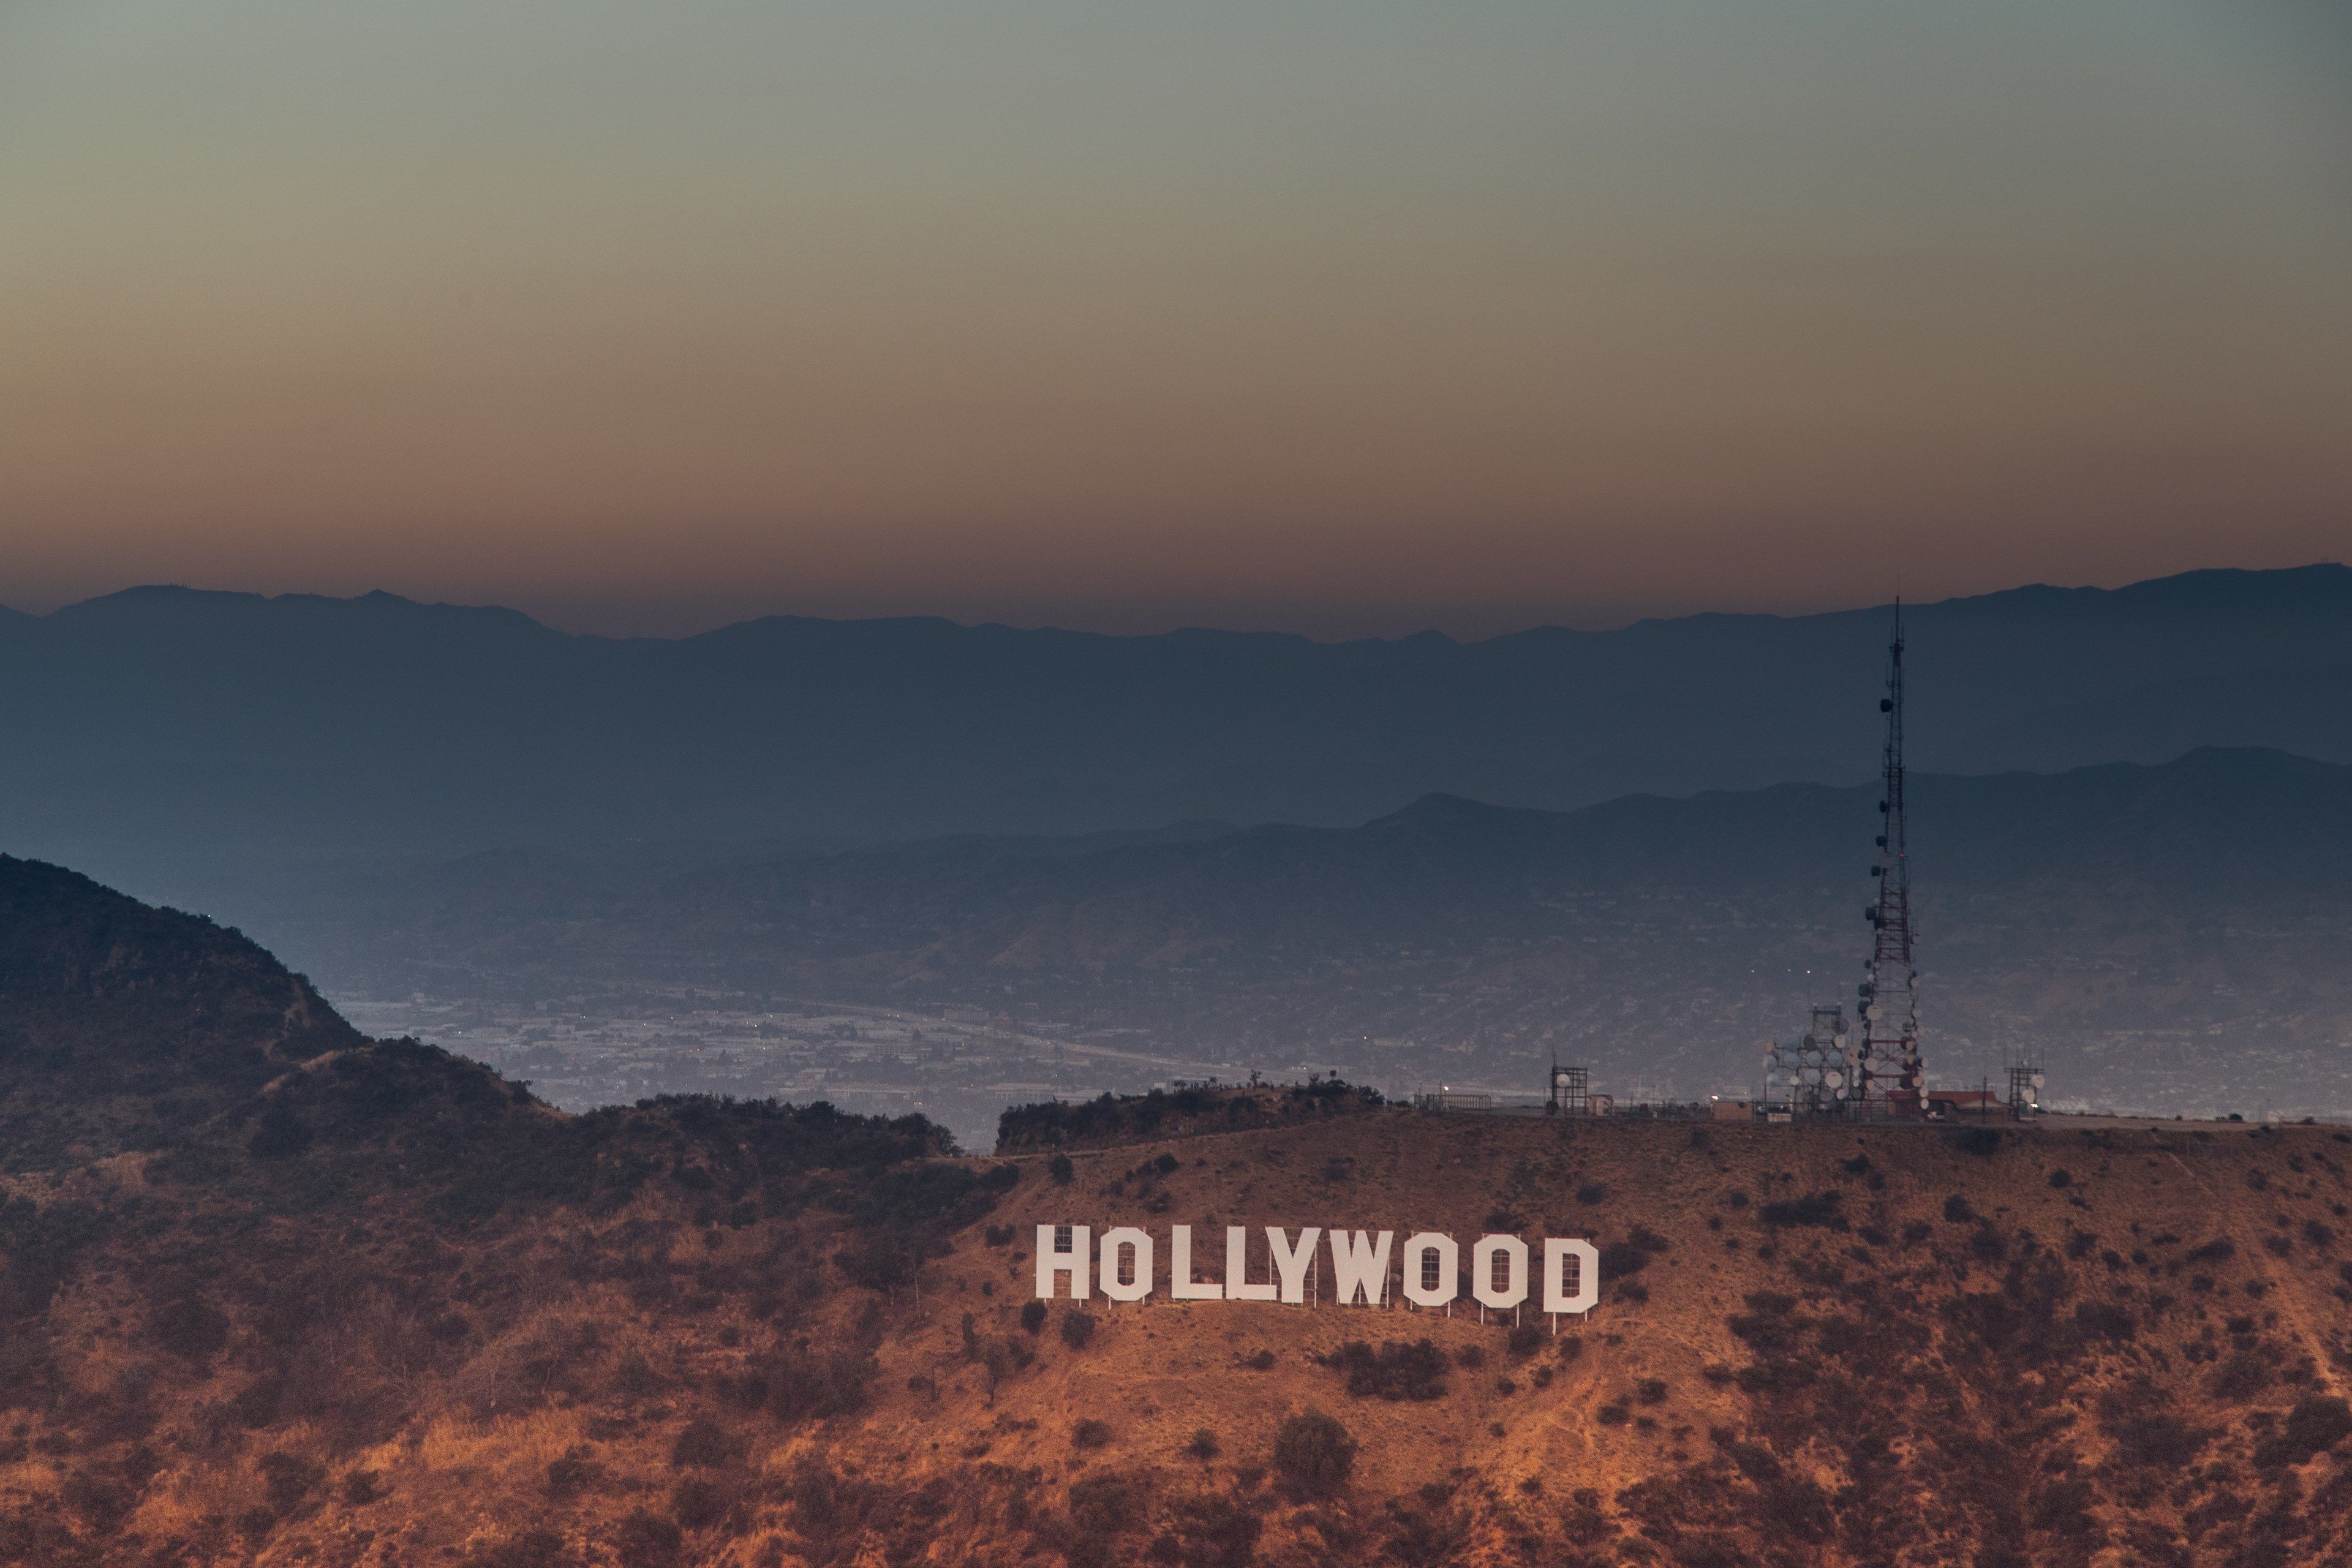 4k Hollywood Hills Wallpapers Wallpaper Cave